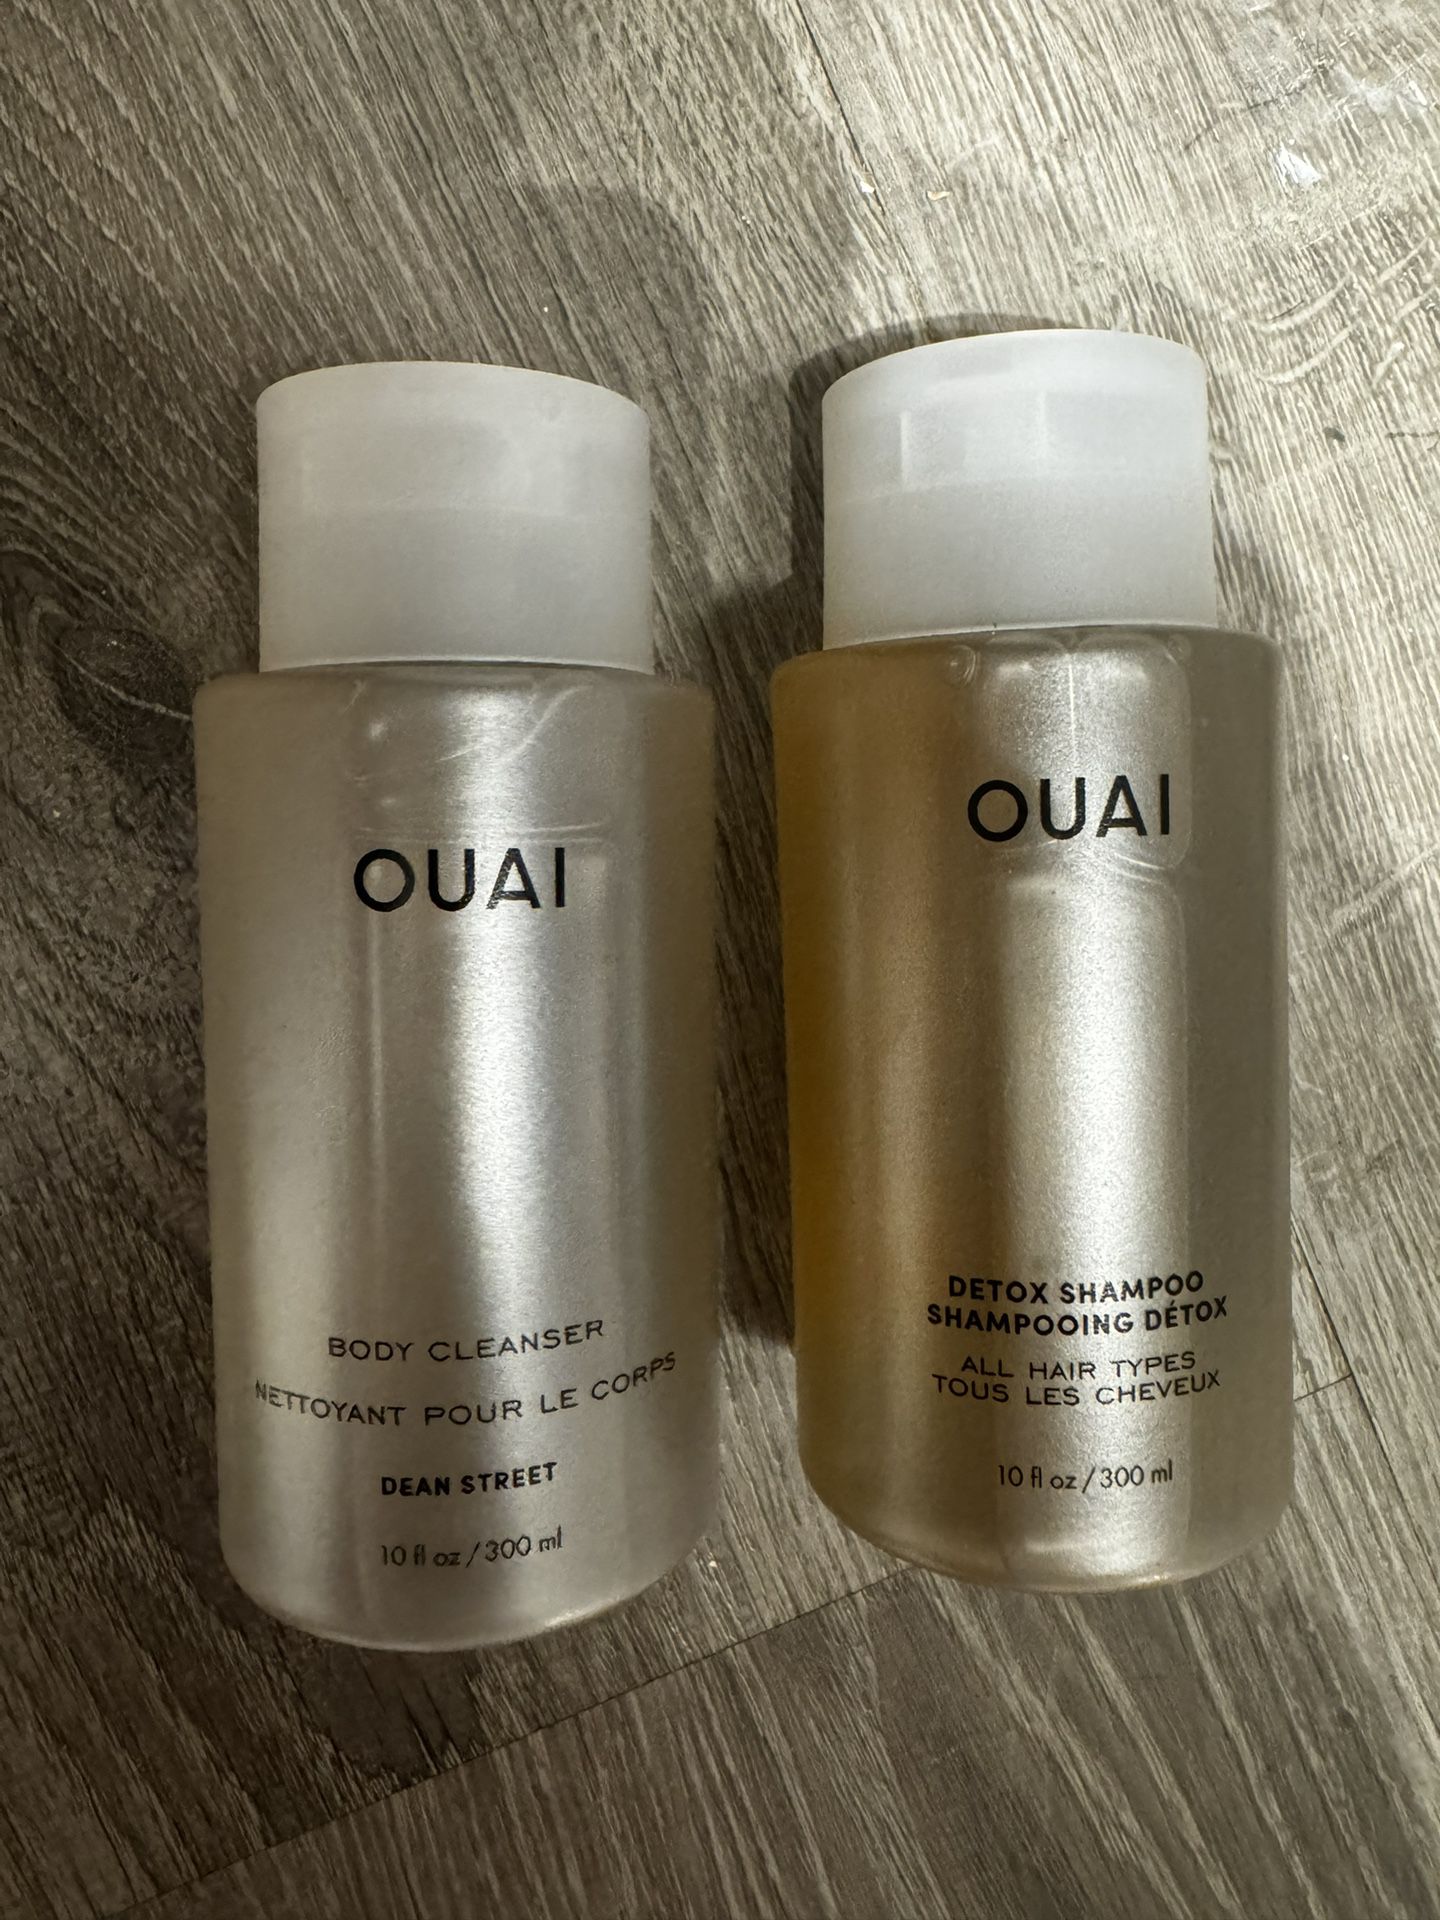 Ouai DETOX SHAMPOO & BODY CLEANSER+ 2 extra leave in conditioner 25ml